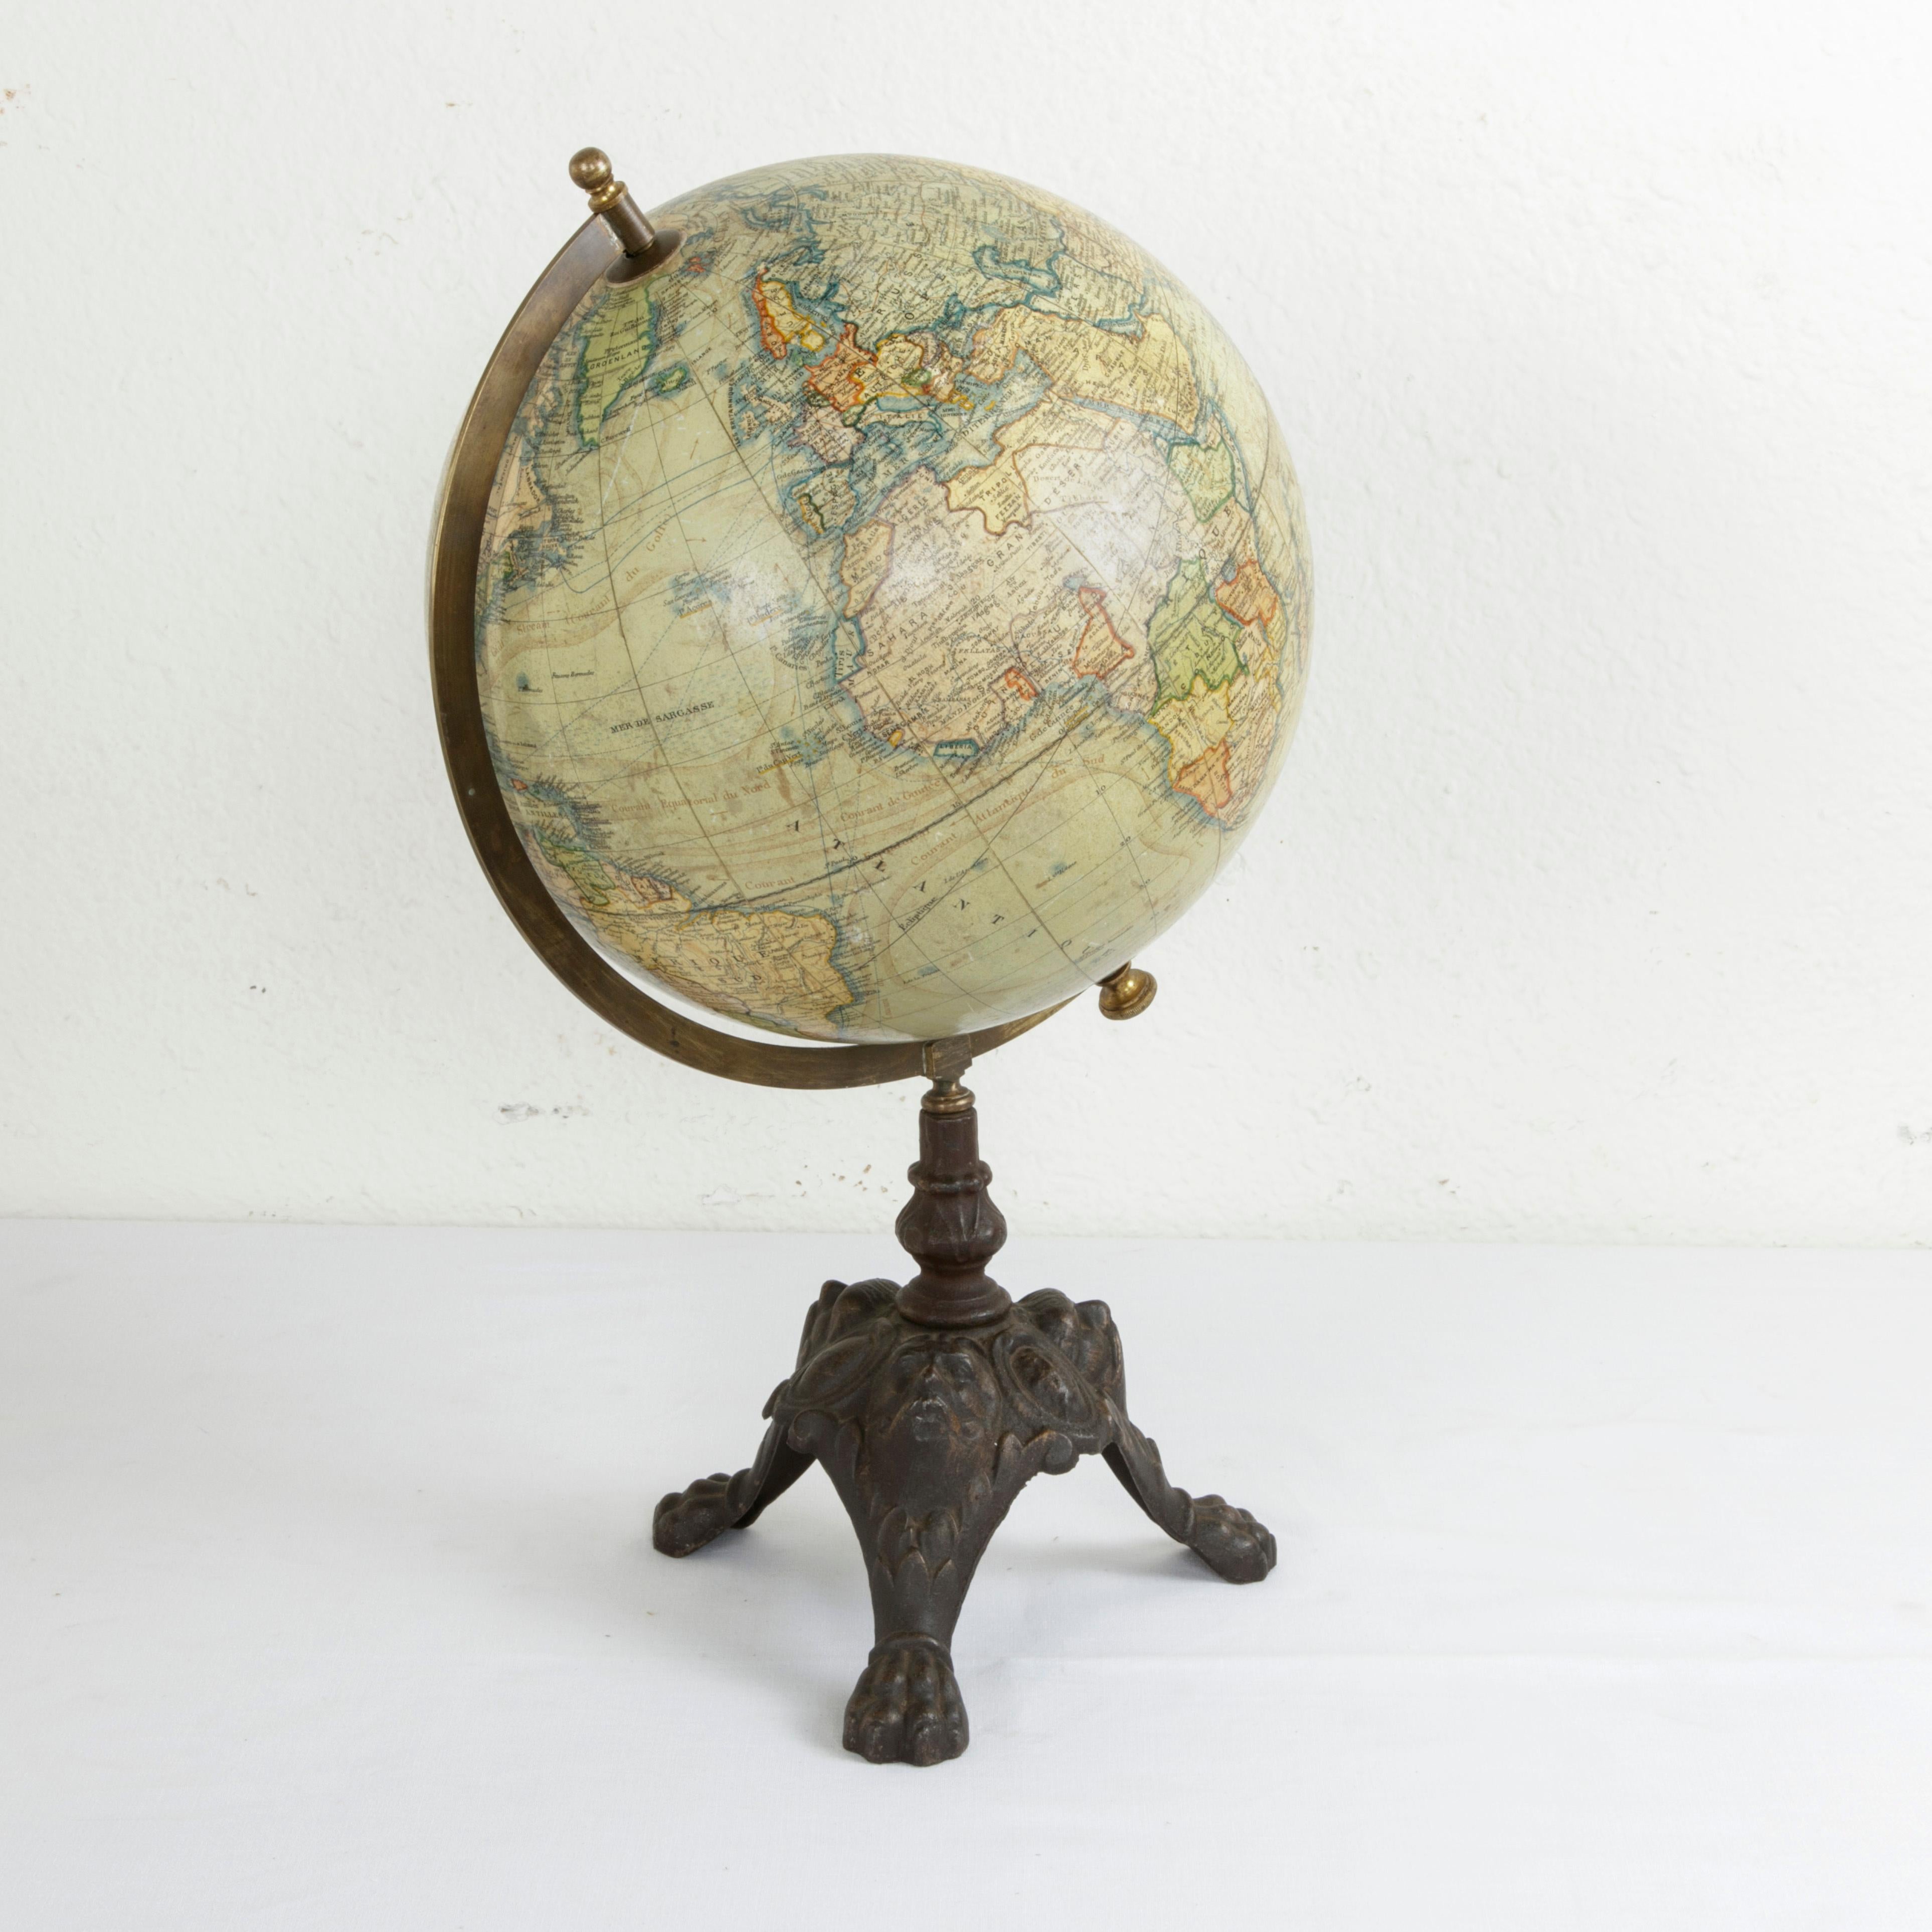 This late 19th century terrestrial globe features its original cast iron tripod base with claw feet, masques, and cartouches. Displaying the world as it was around the turn of the 20th century, this globe was created by the Belgian cartographer